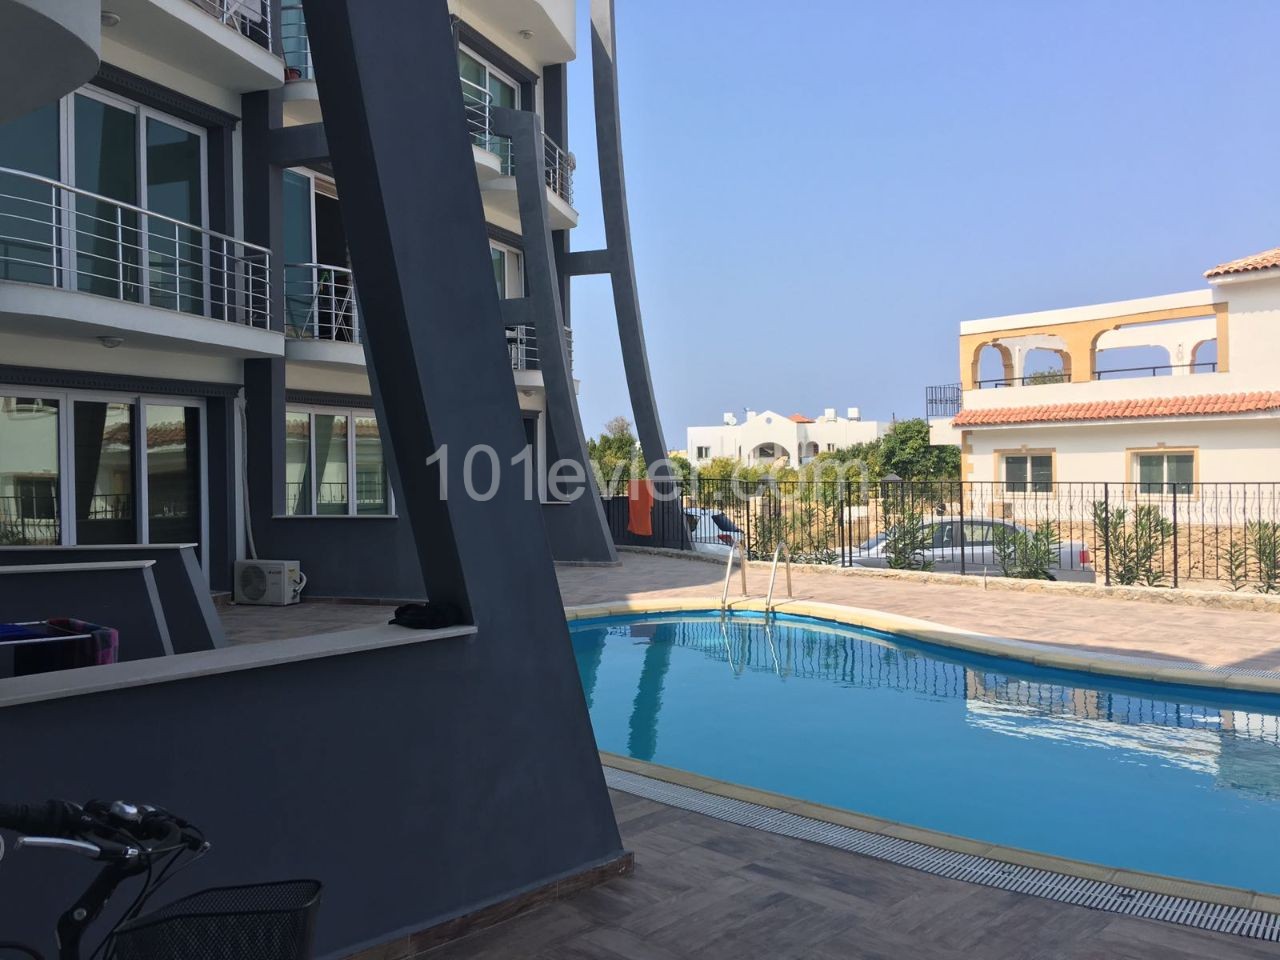 For sale Kyrenia-Alsancak 1+1, fully furnished, air-conditioned, has a terrace, half park, 42 square meters, first floor, in a complex with pool, 8 years building, equivalent to your husband.